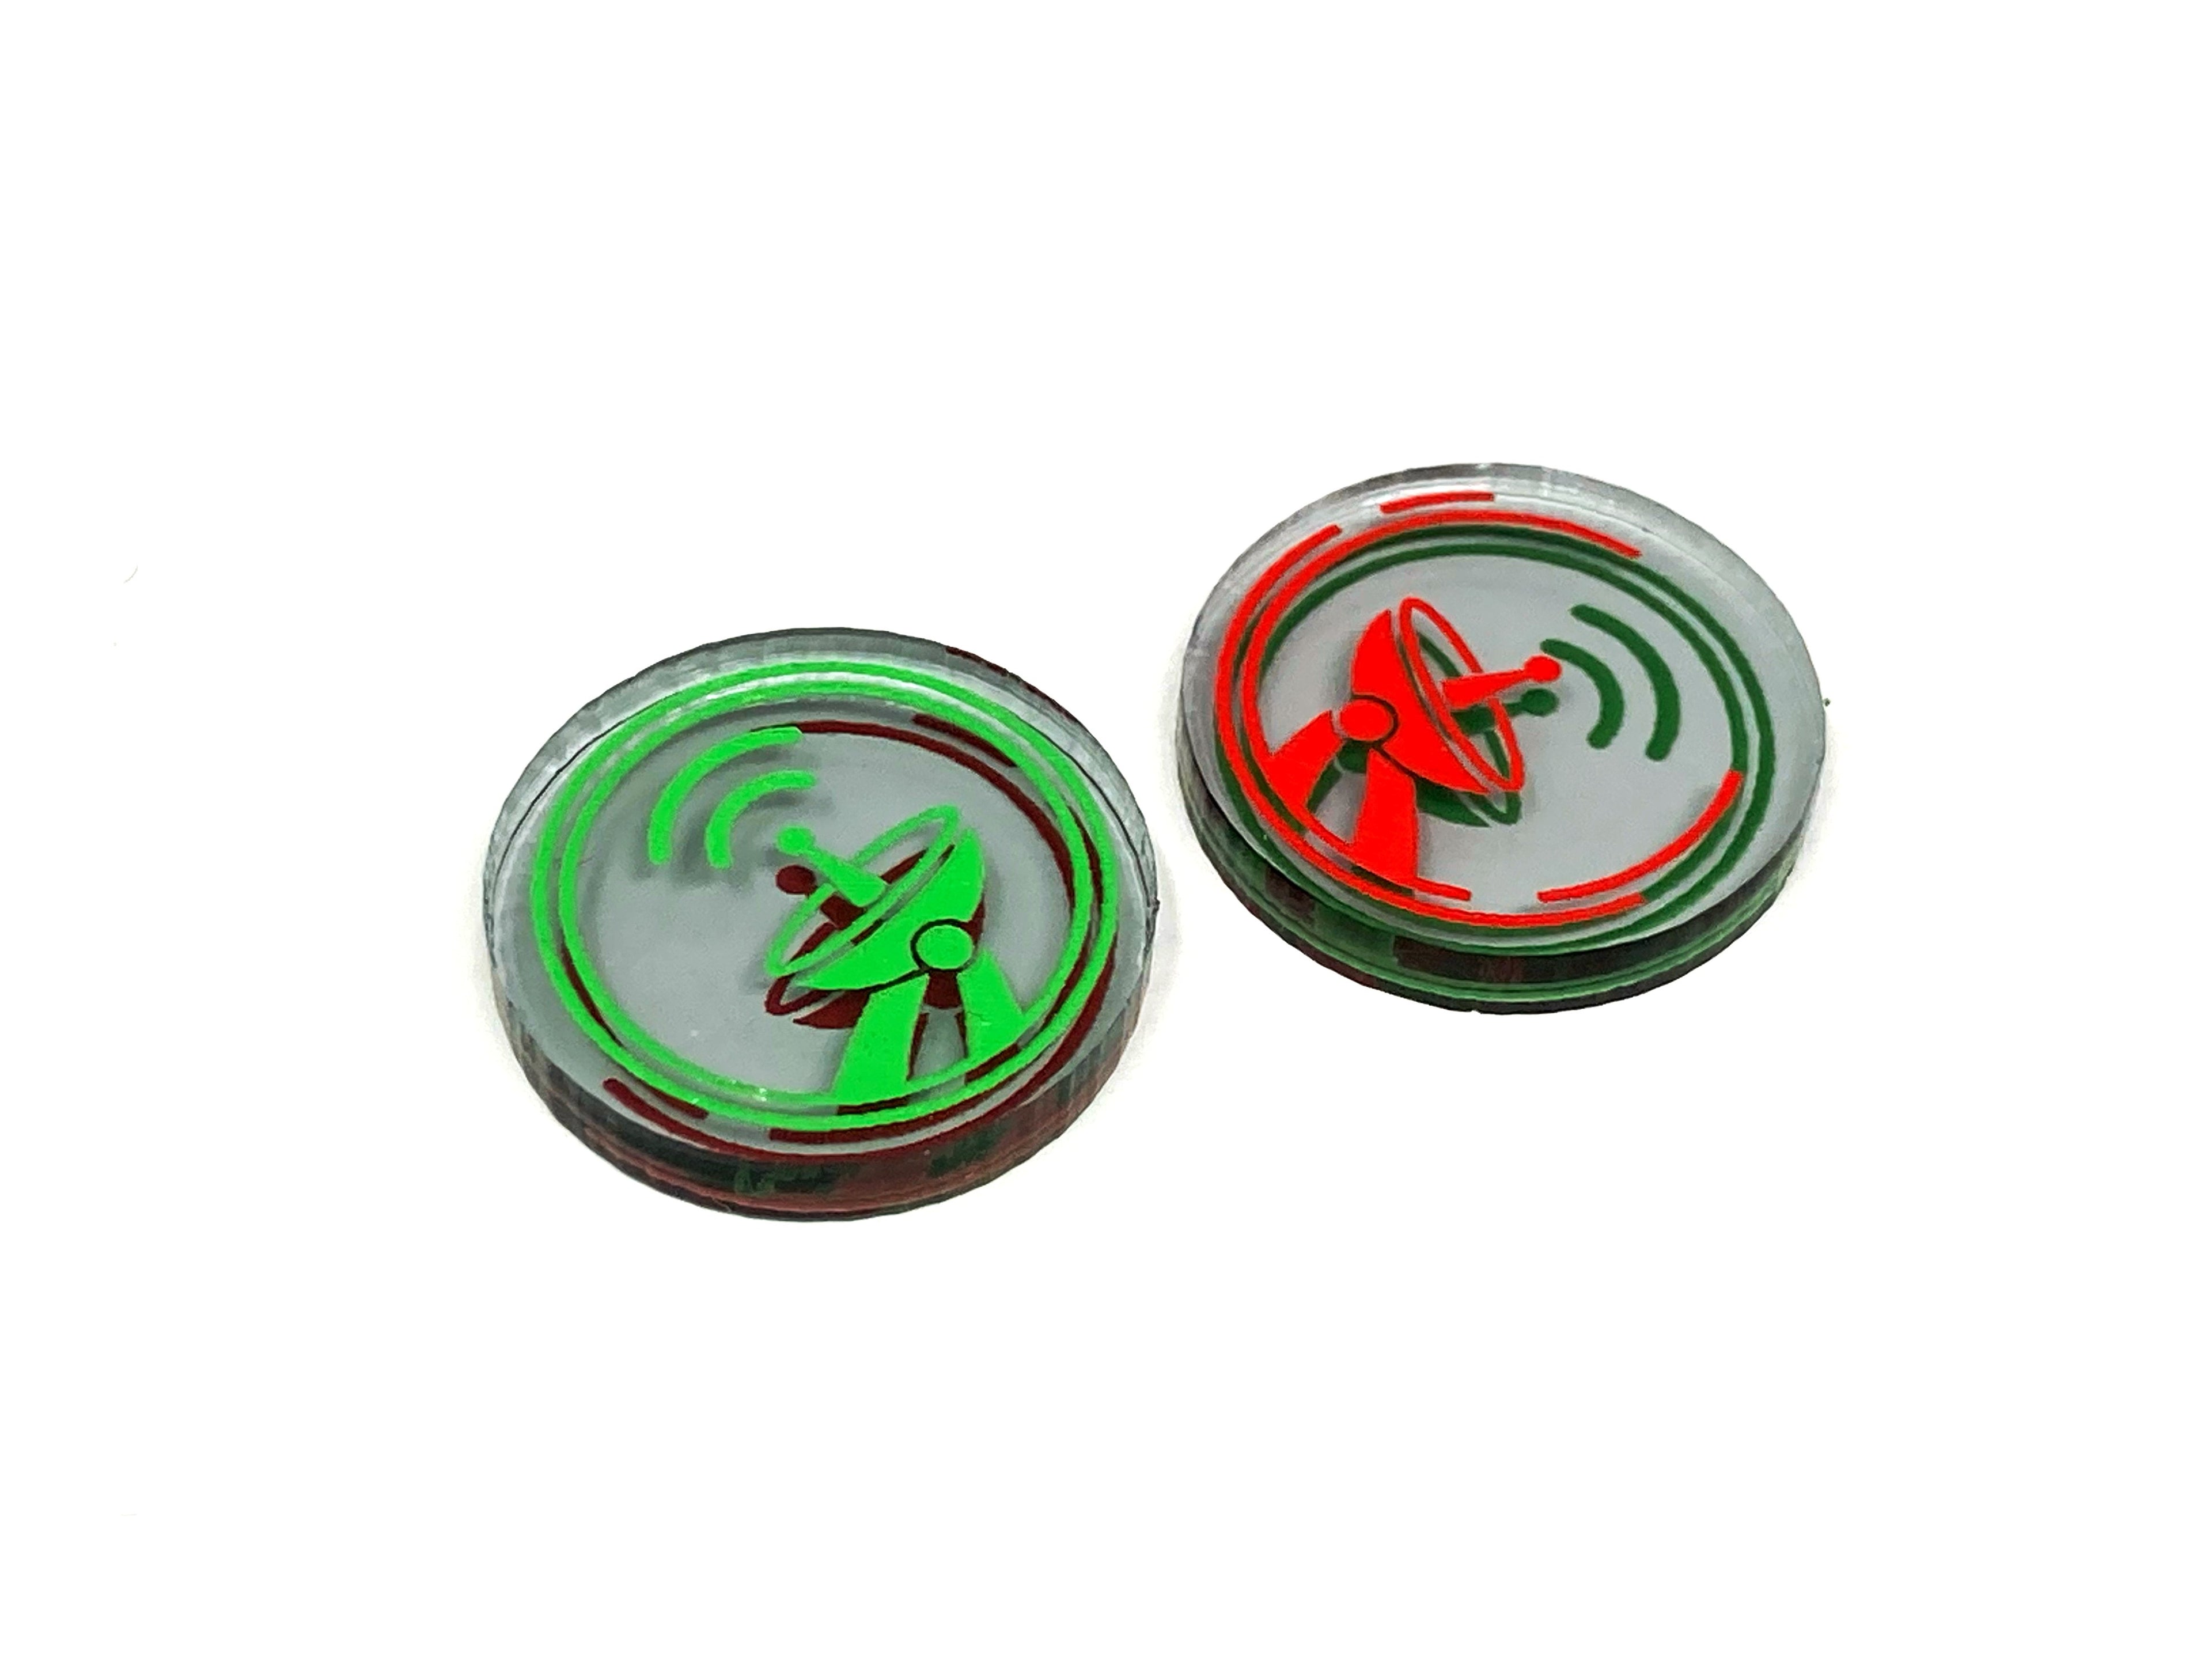 2 x Passive Sensor Tokens - Translucent Series (Double Sided)